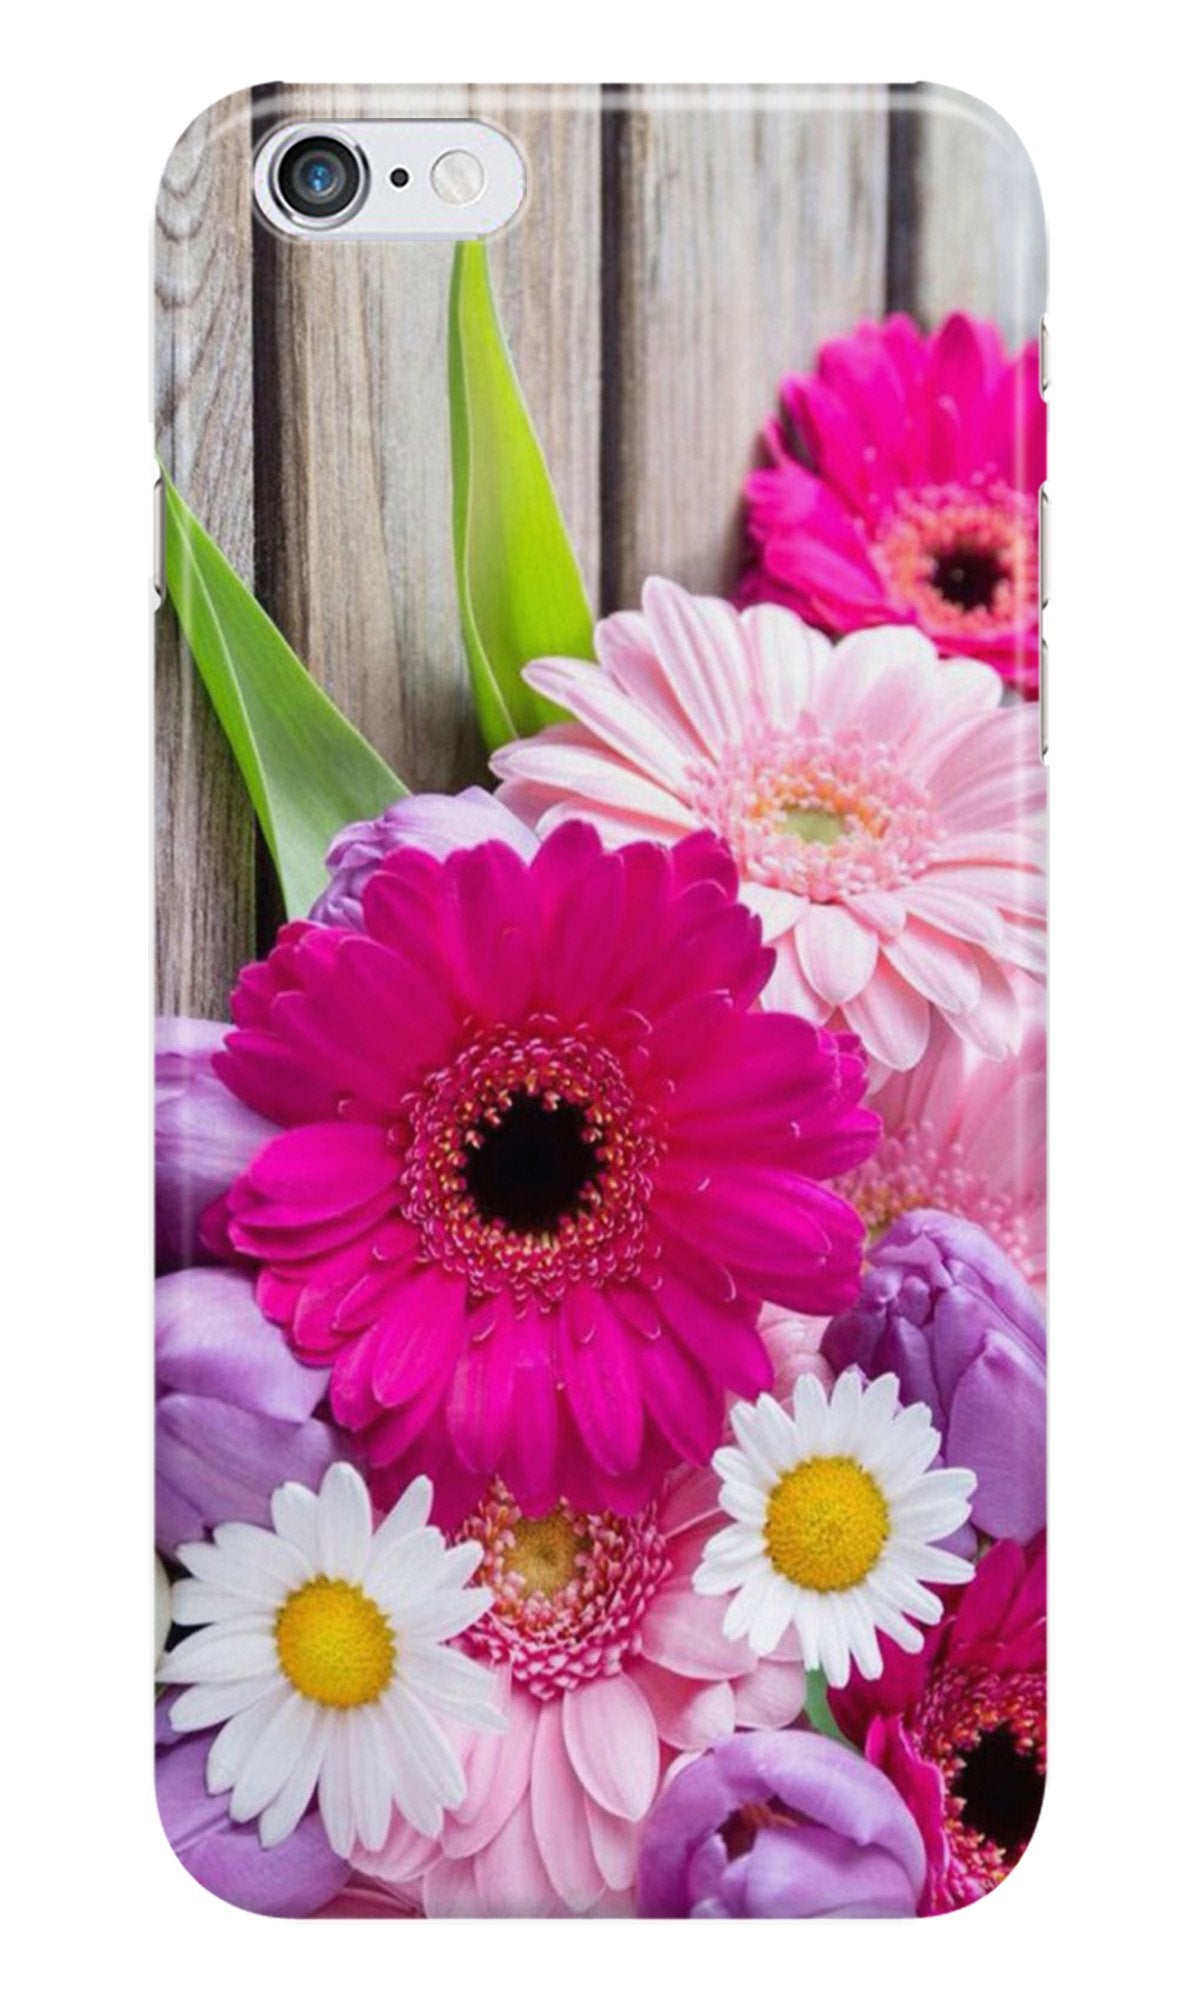 Coloful Daisy2 Case for iPhone 6/ 6s